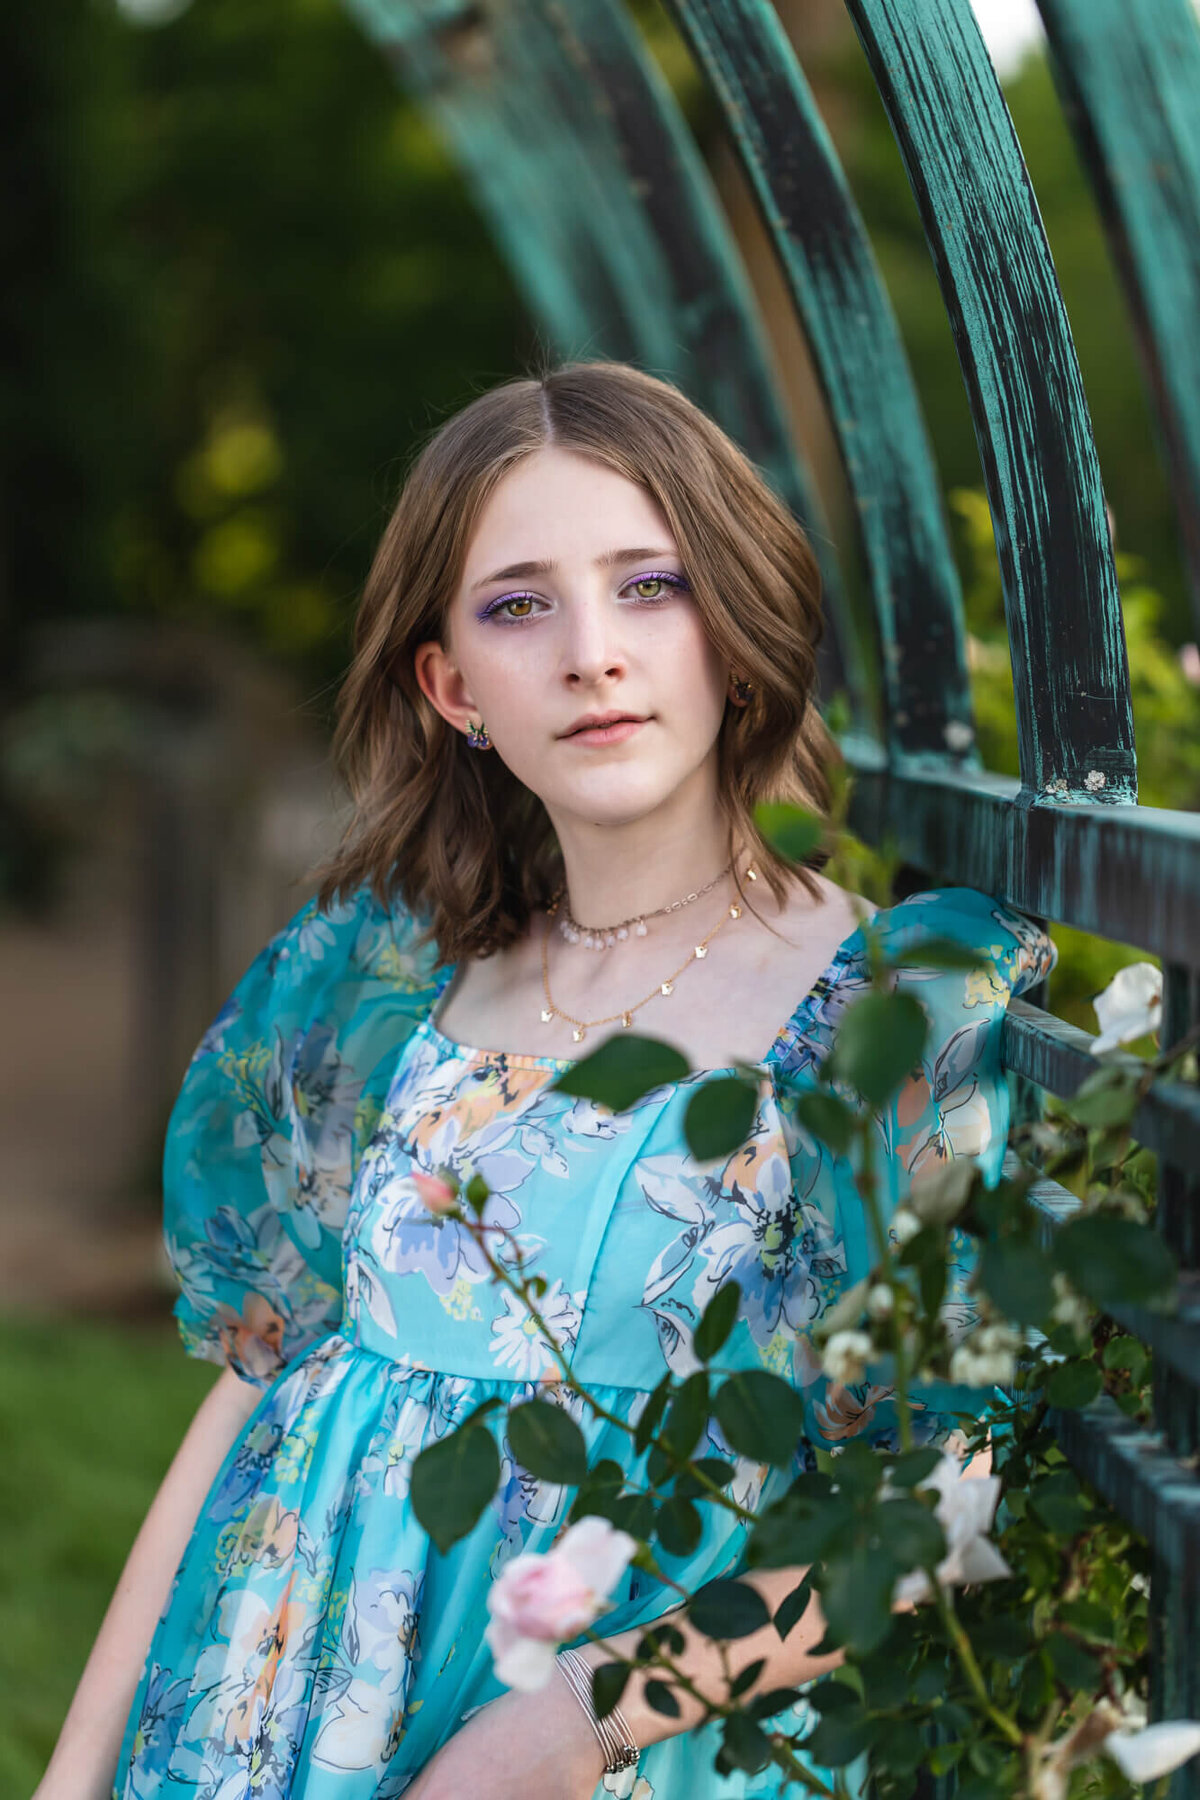 Beautiful green eyed teenage girl in a blue floral dress posing under a rose trellis. Captured by Springfield, MO teen photographer Dynae Levingston.